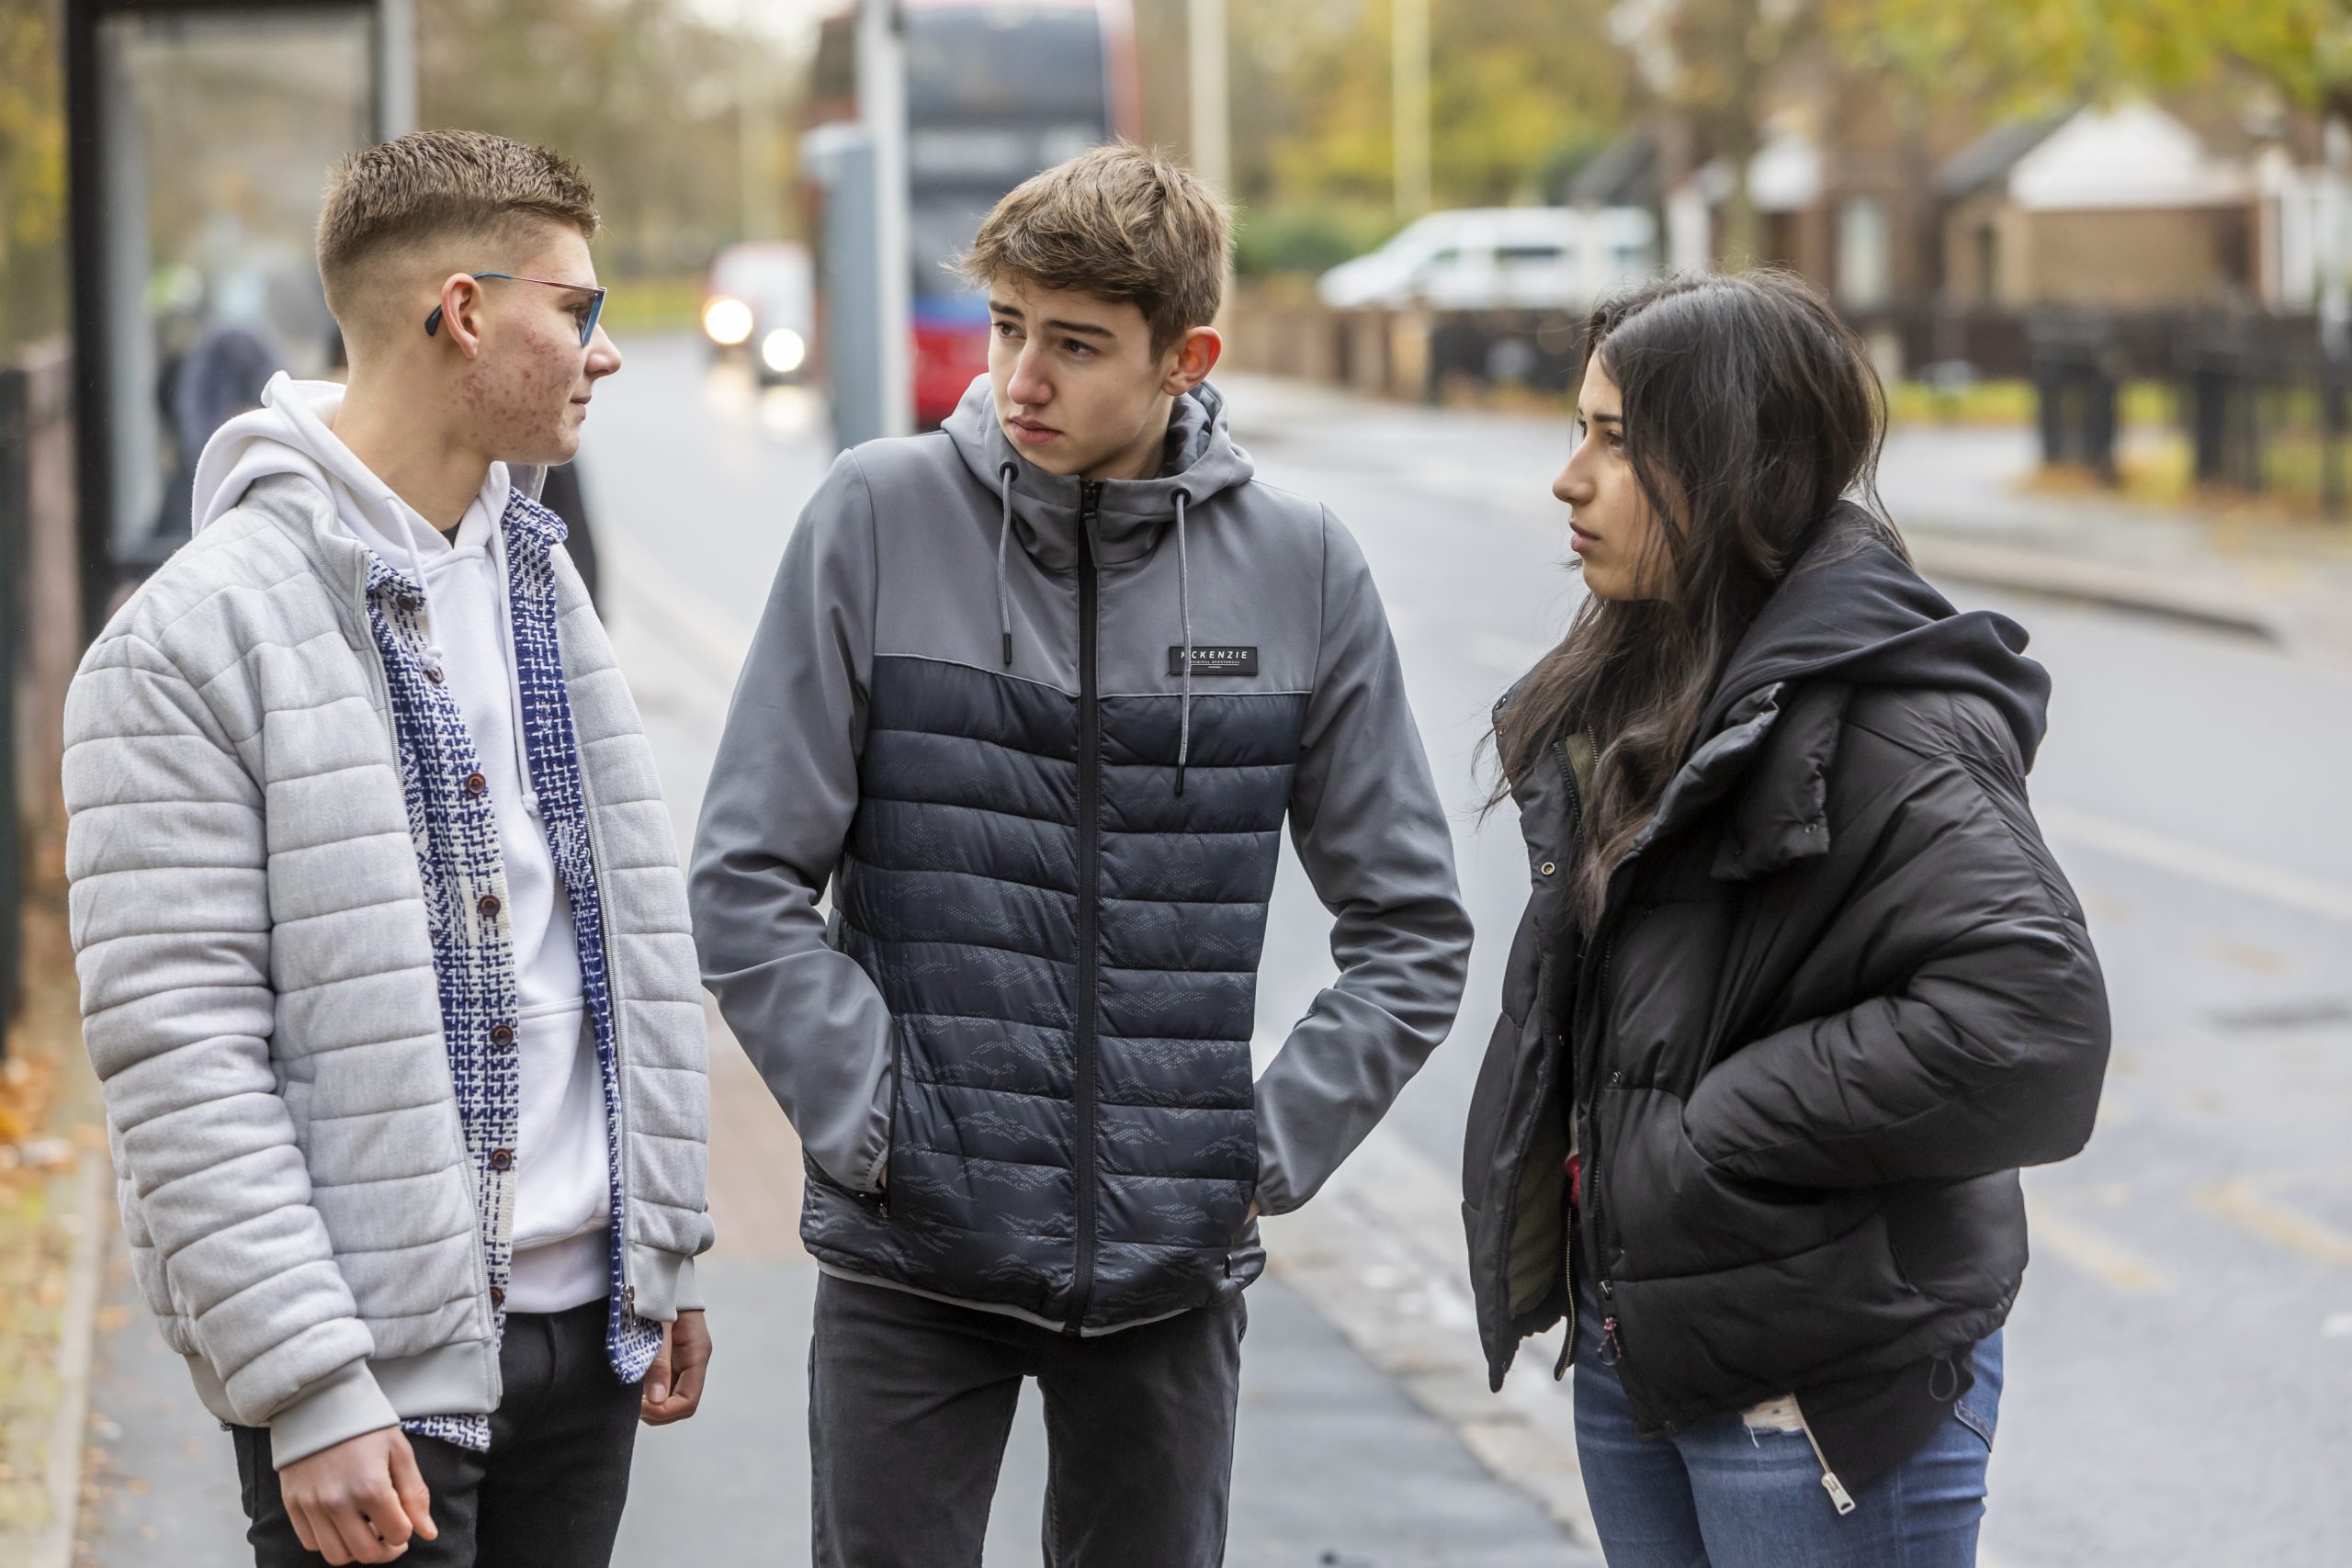 Three young people stand chatting to each other about how police cautions work.